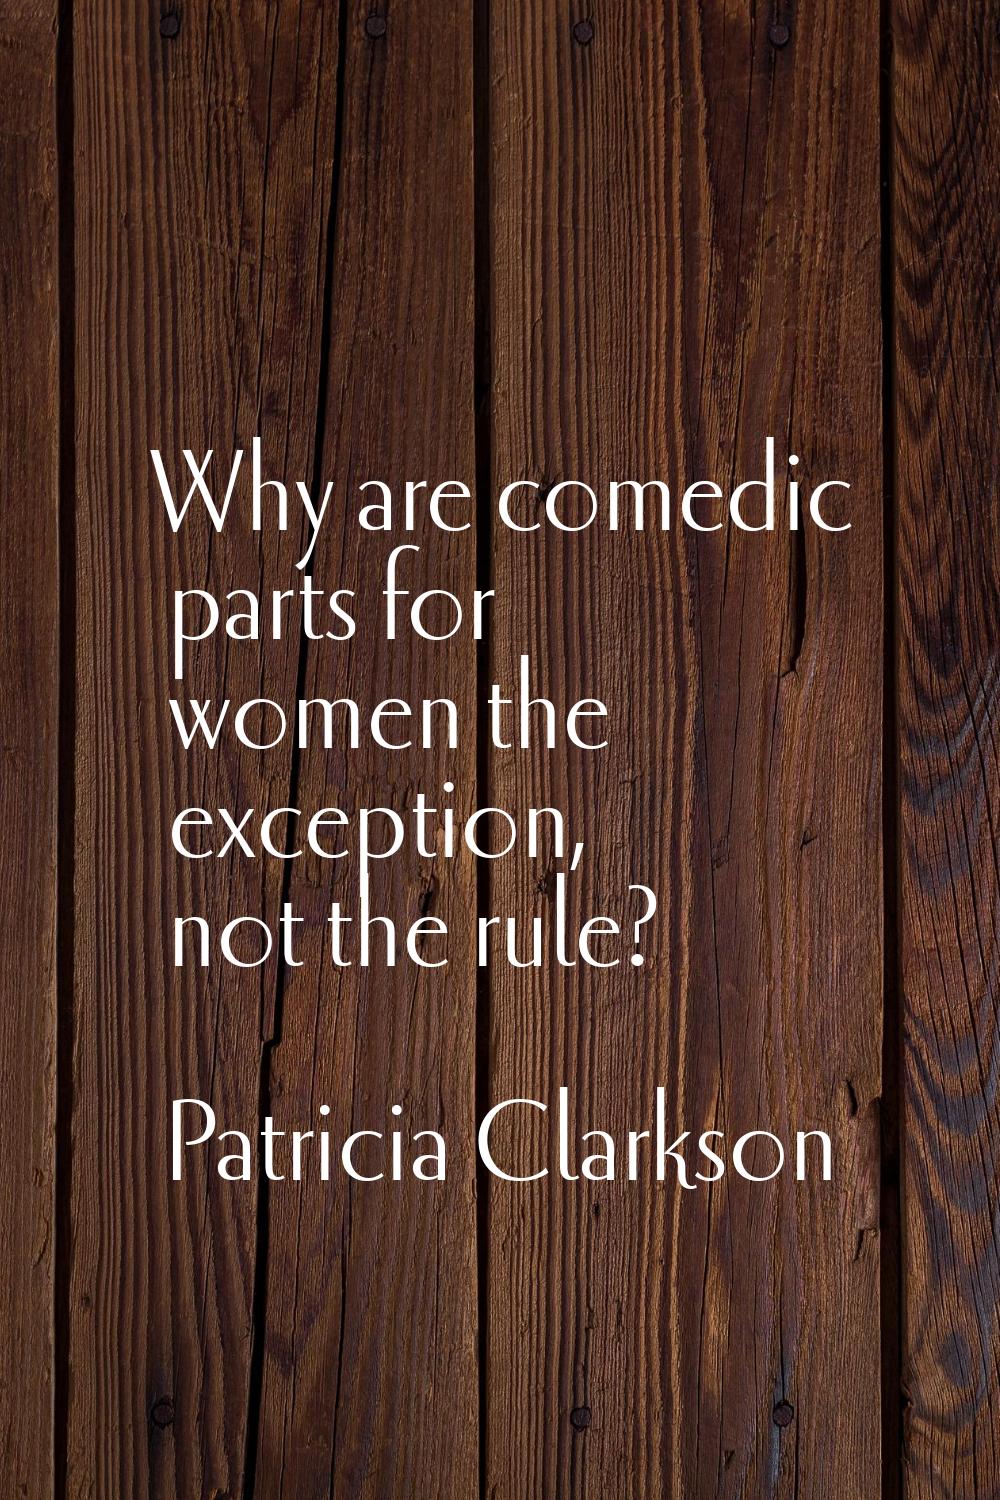 Why are comedic parts for women the exception, not the rule?